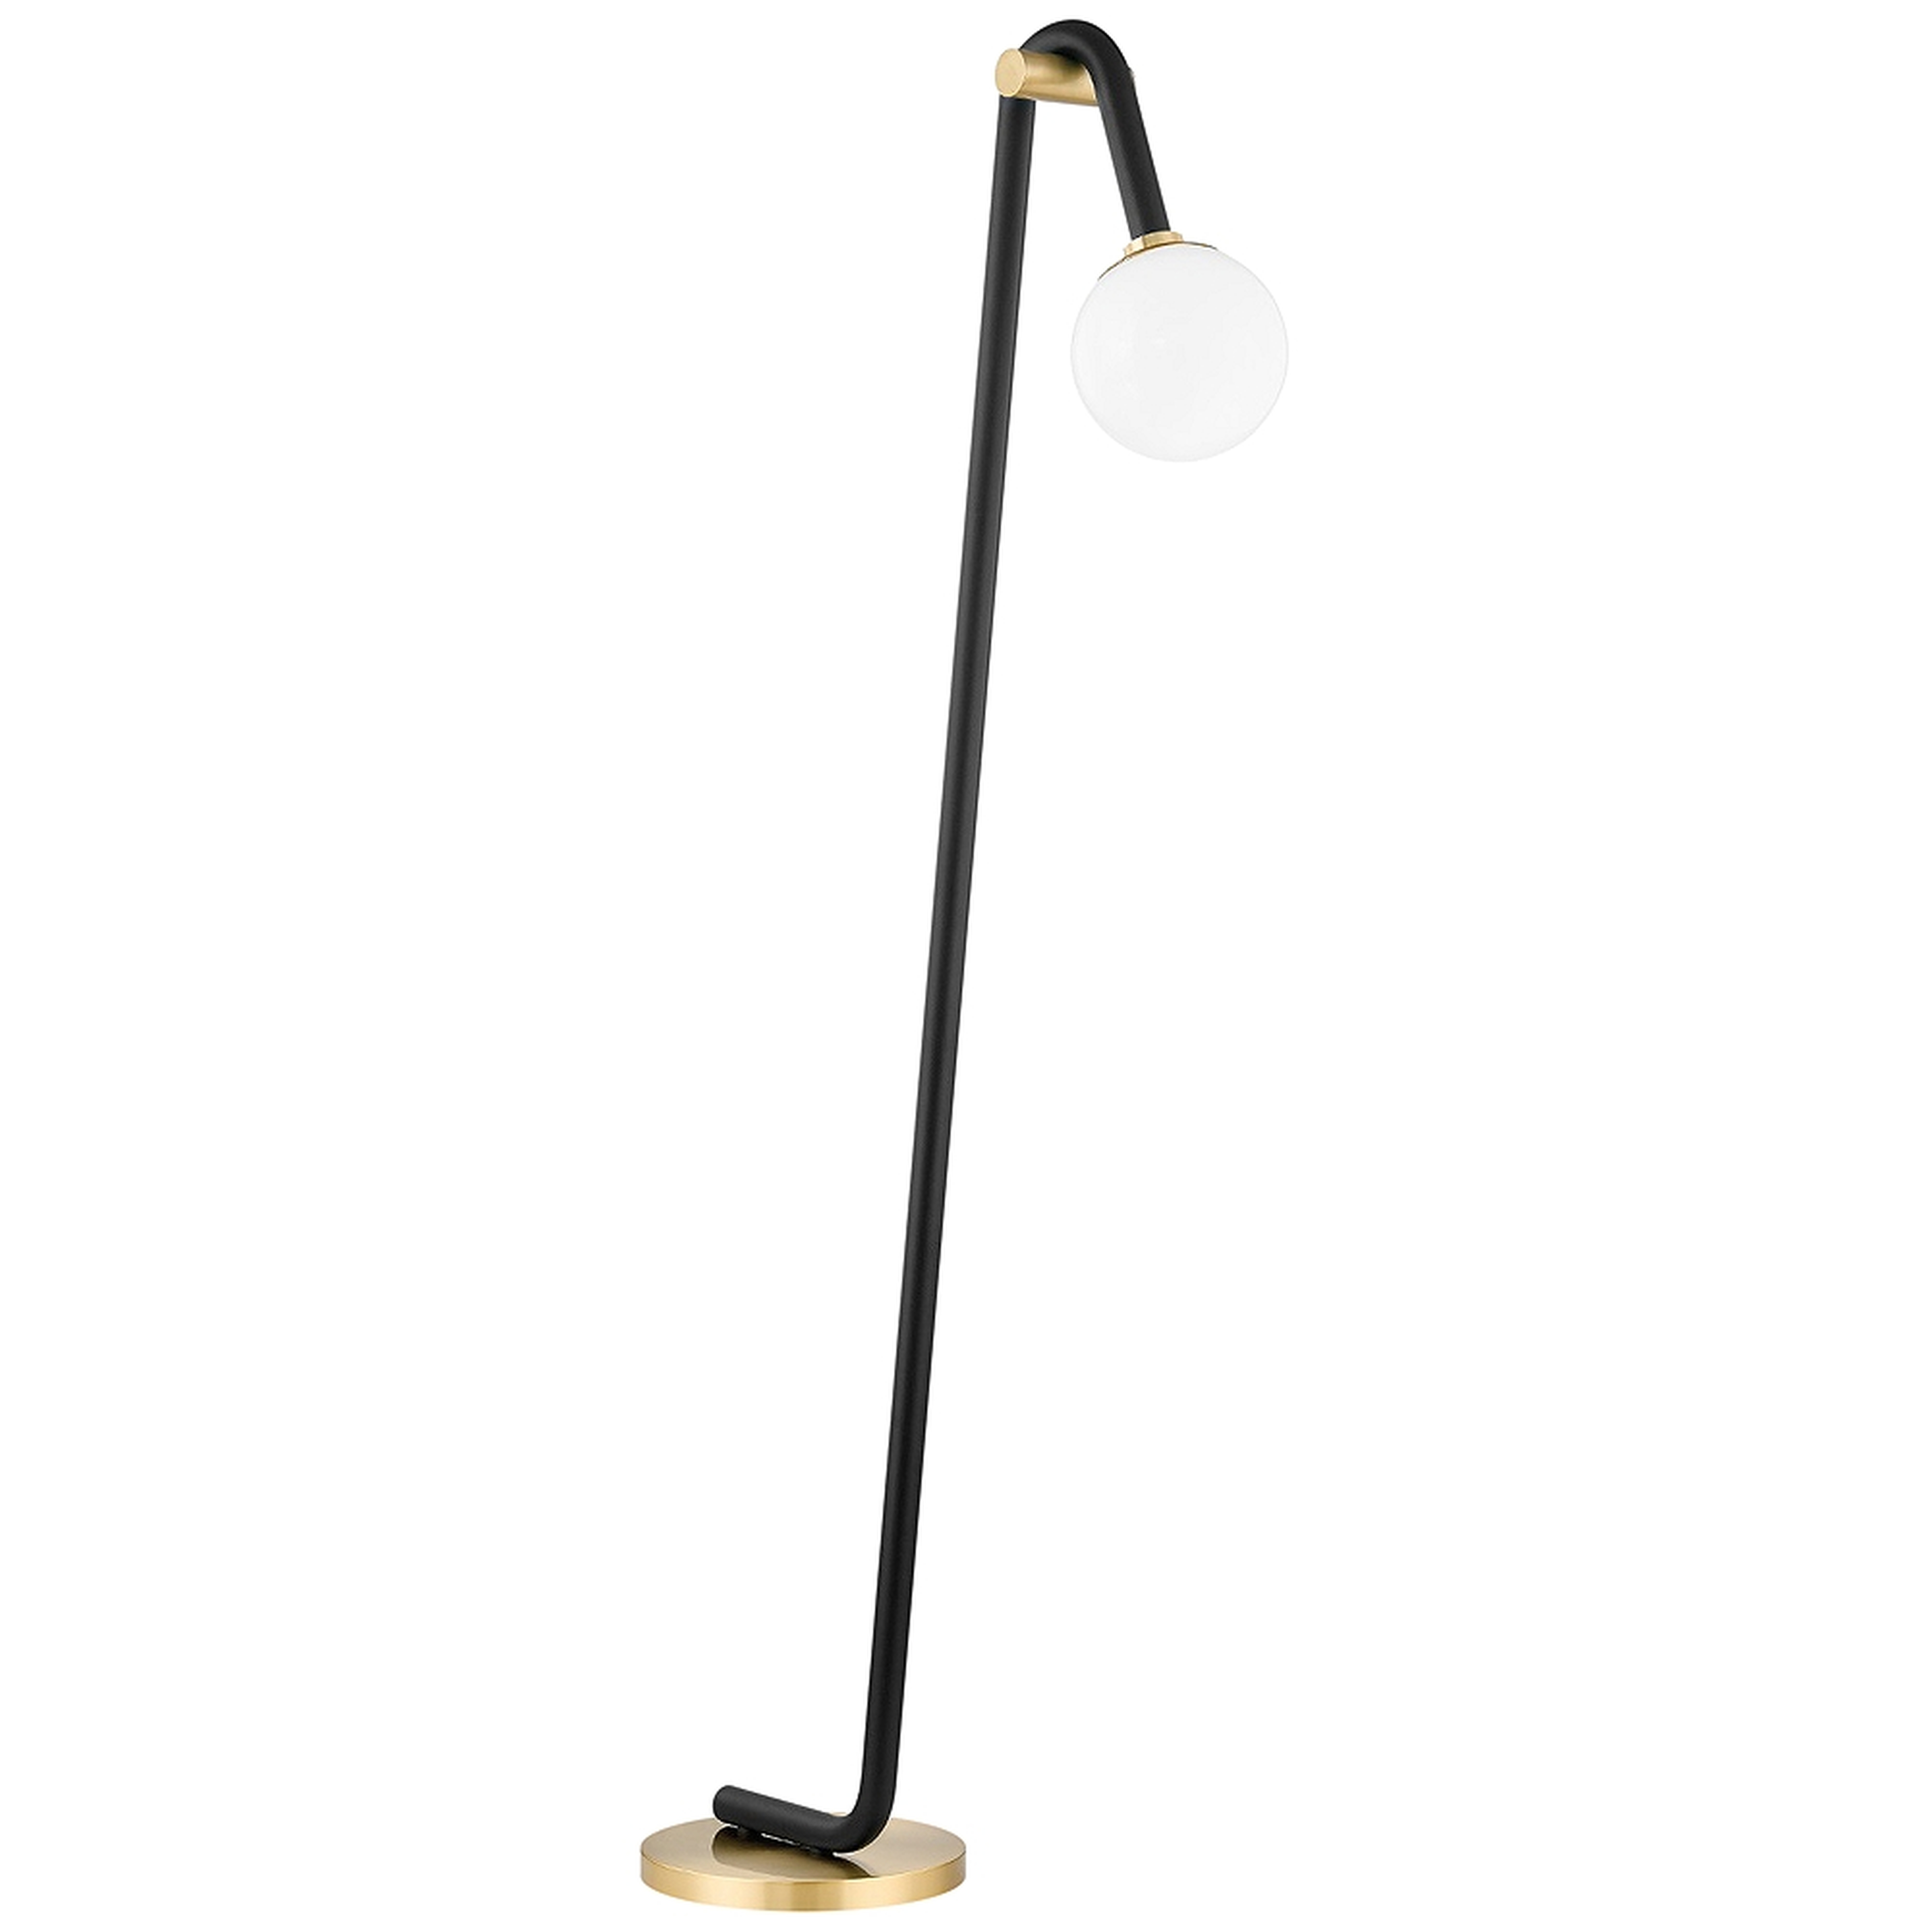 Mitzi Whit Aged Brass and Black Floor Lamp - Style # 82P58 - Lamps Plus